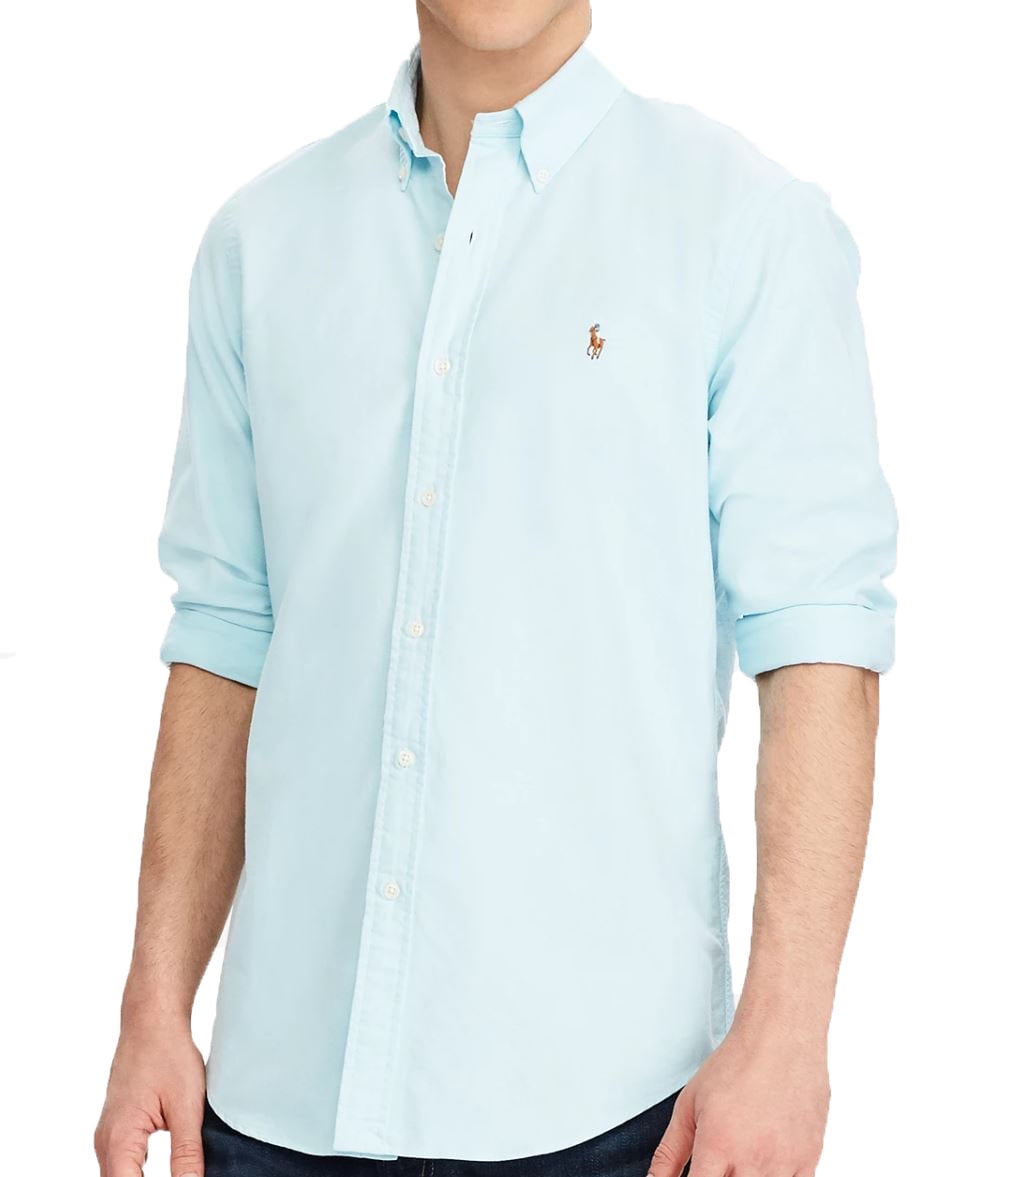 Polo Ralph Lauren Outlet: Oxford shirt in cotton with button down